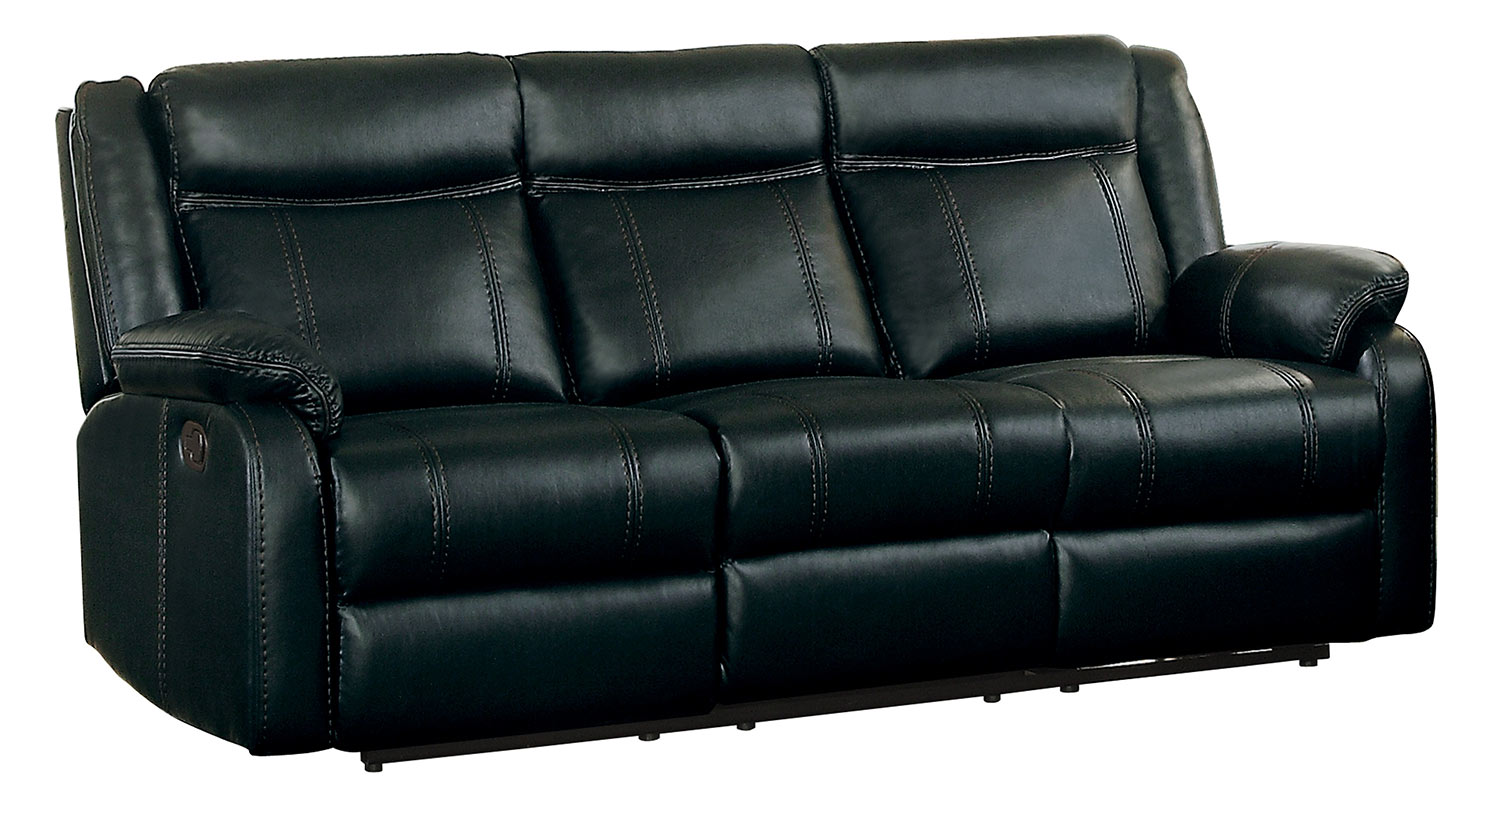 Homelegance Jude Double Reclining Sofa with Drop-Down Table - Black Leather Gel Match